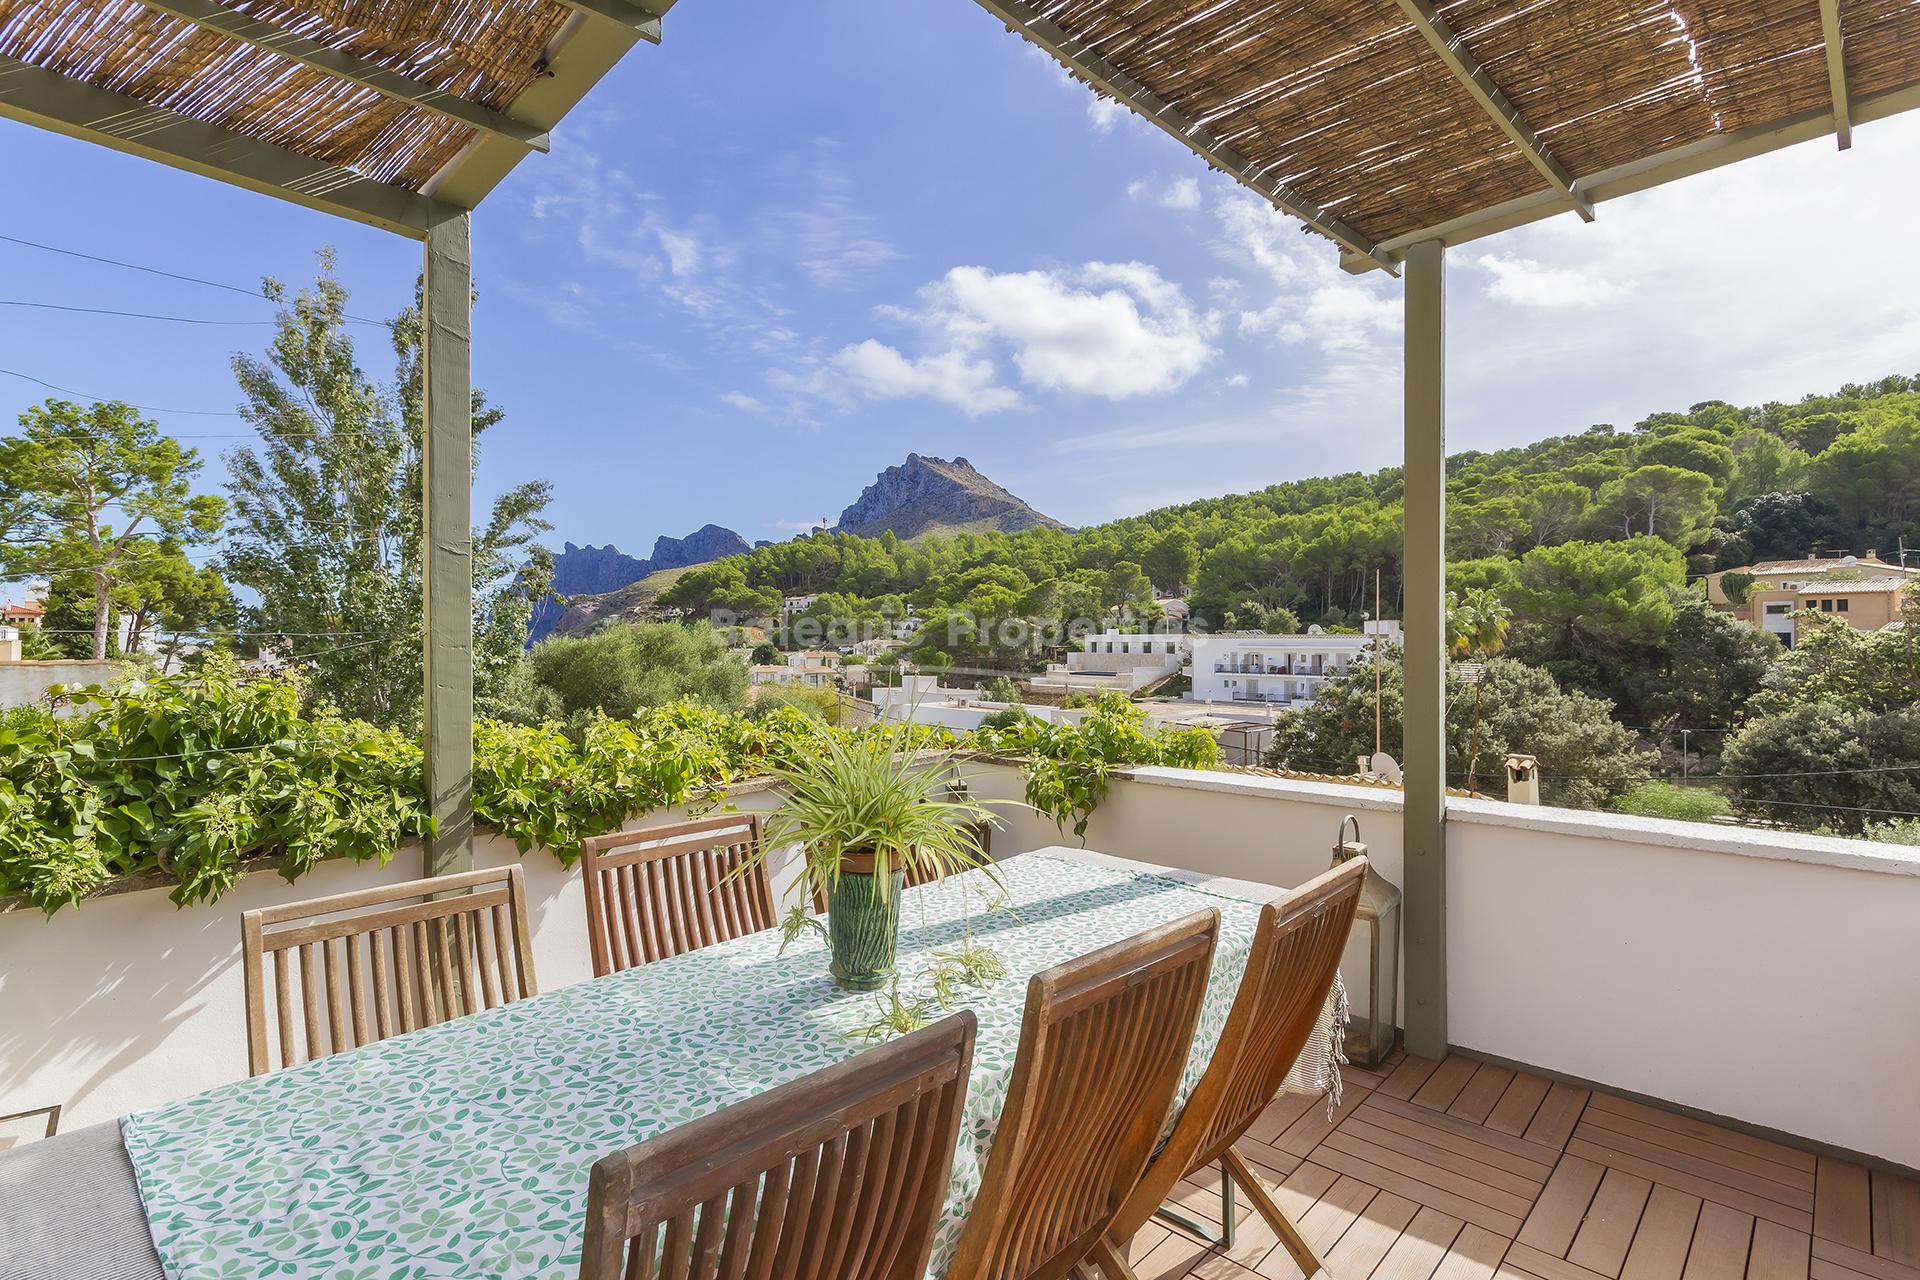 Chic apartment with a business premises for sale in Cala San Vicente, Mallorca